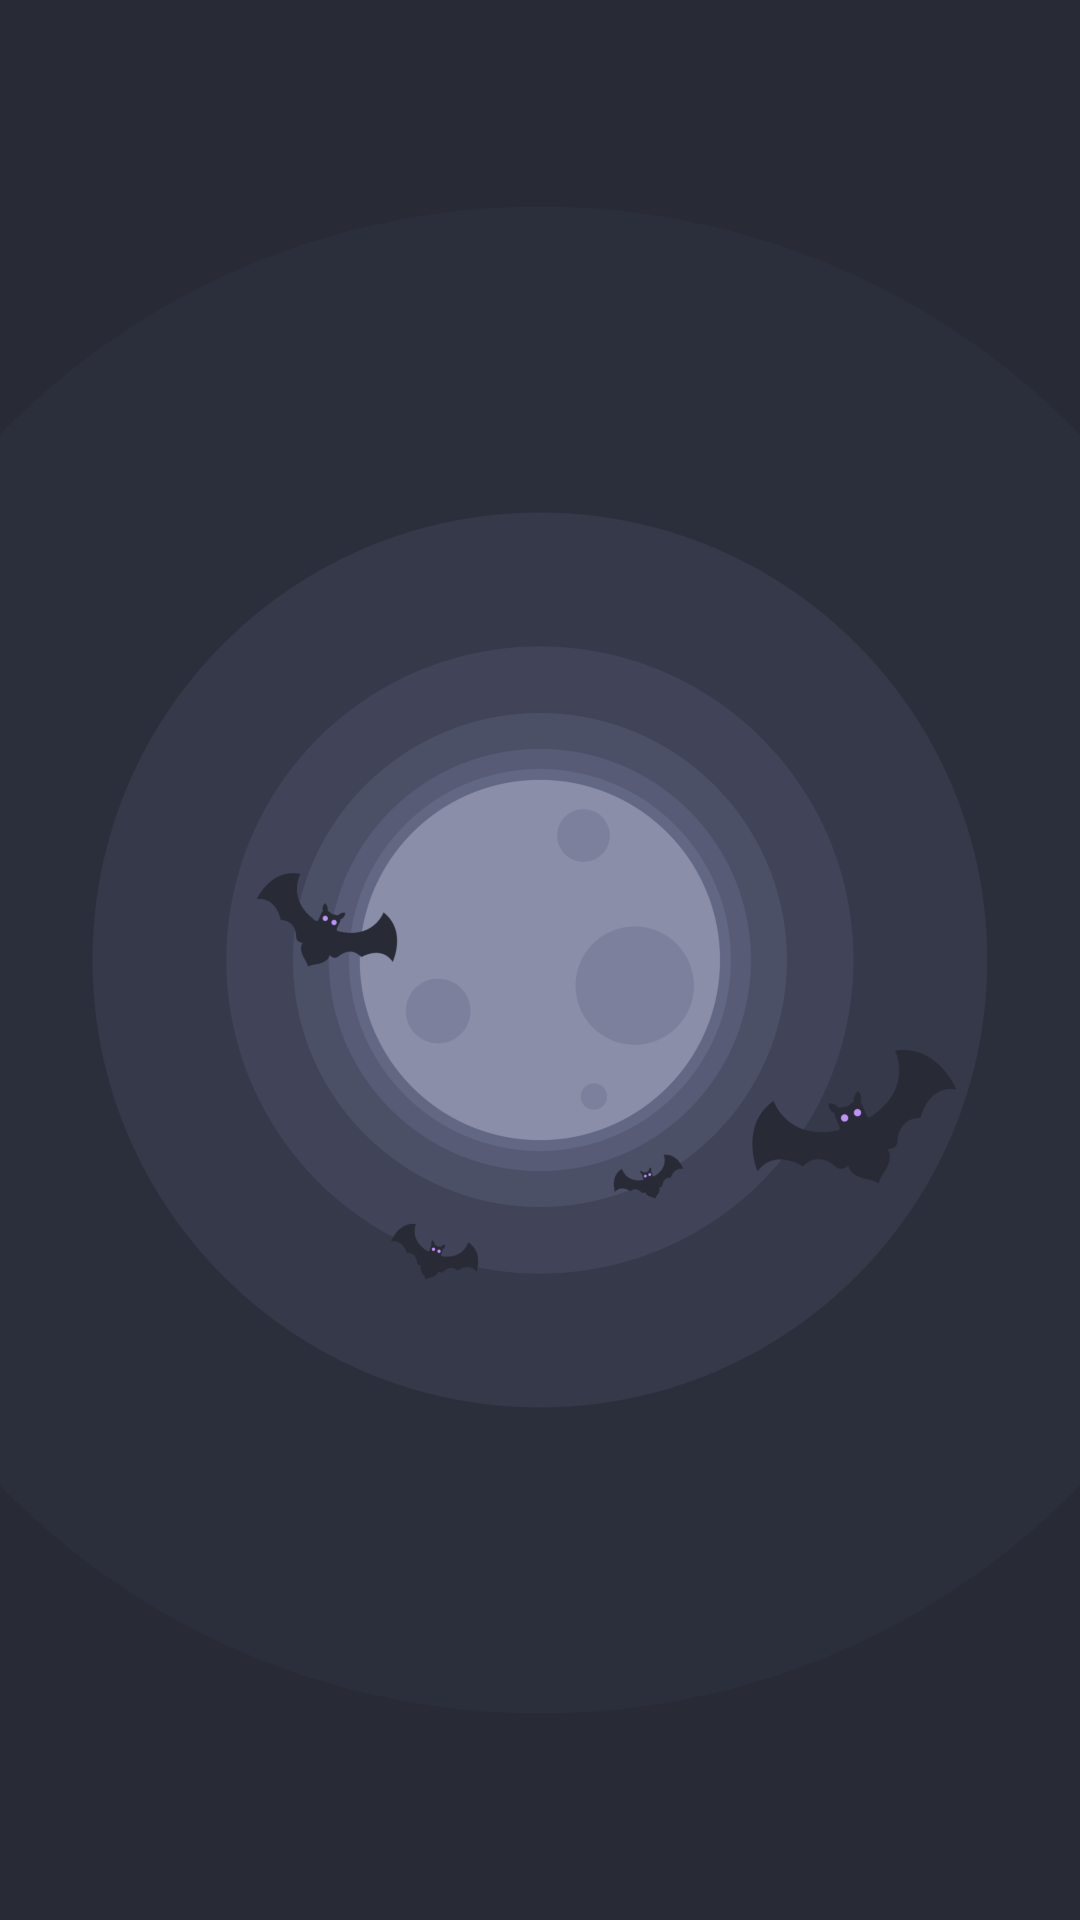 Android Operating System Dracula Theme Bats Minimalism Vertical 1080x1920